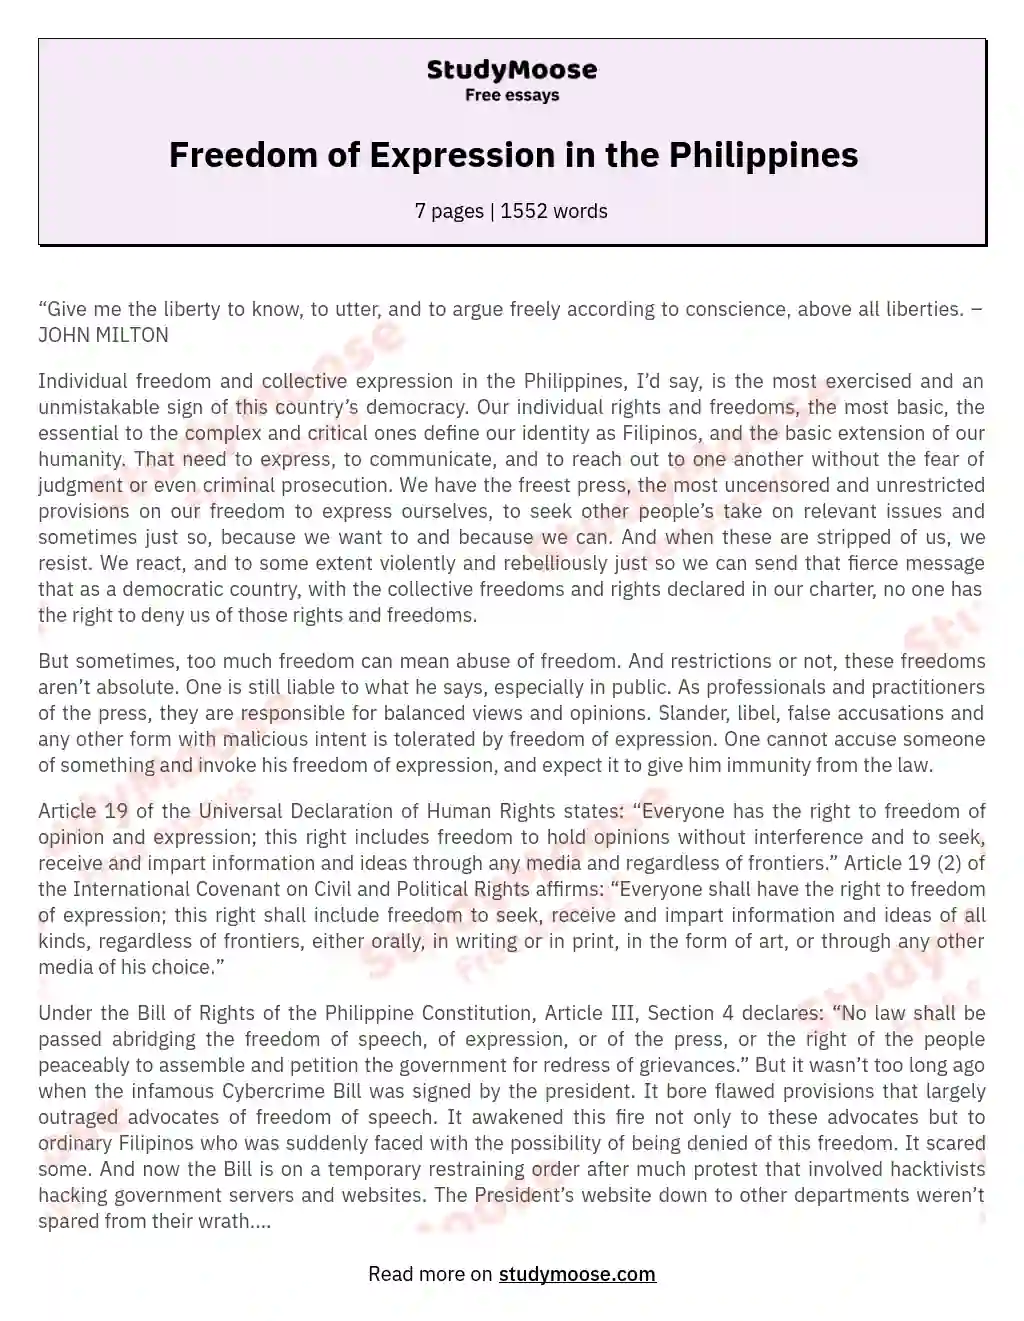 Freedom of Expression in the Philippines essay